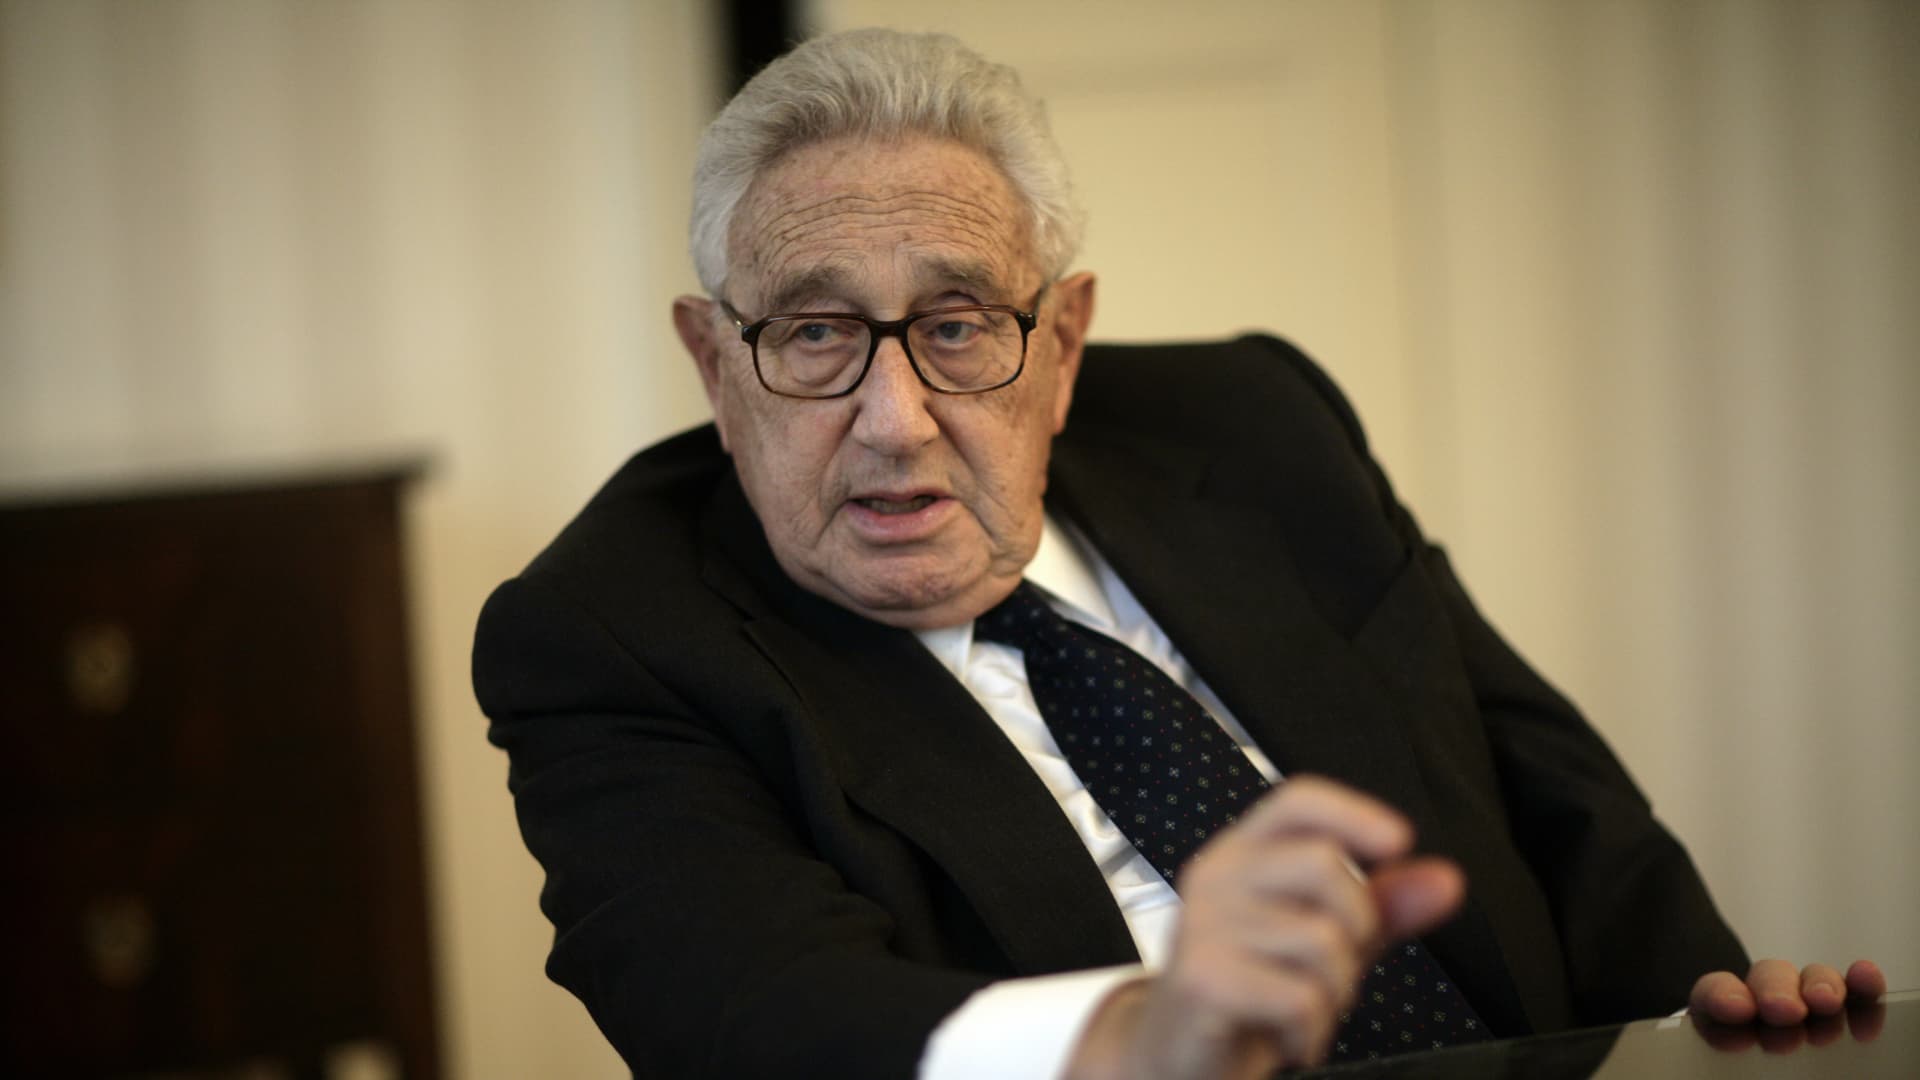 Ukraine rejects Kissinger suggestion it should cede land to Russia